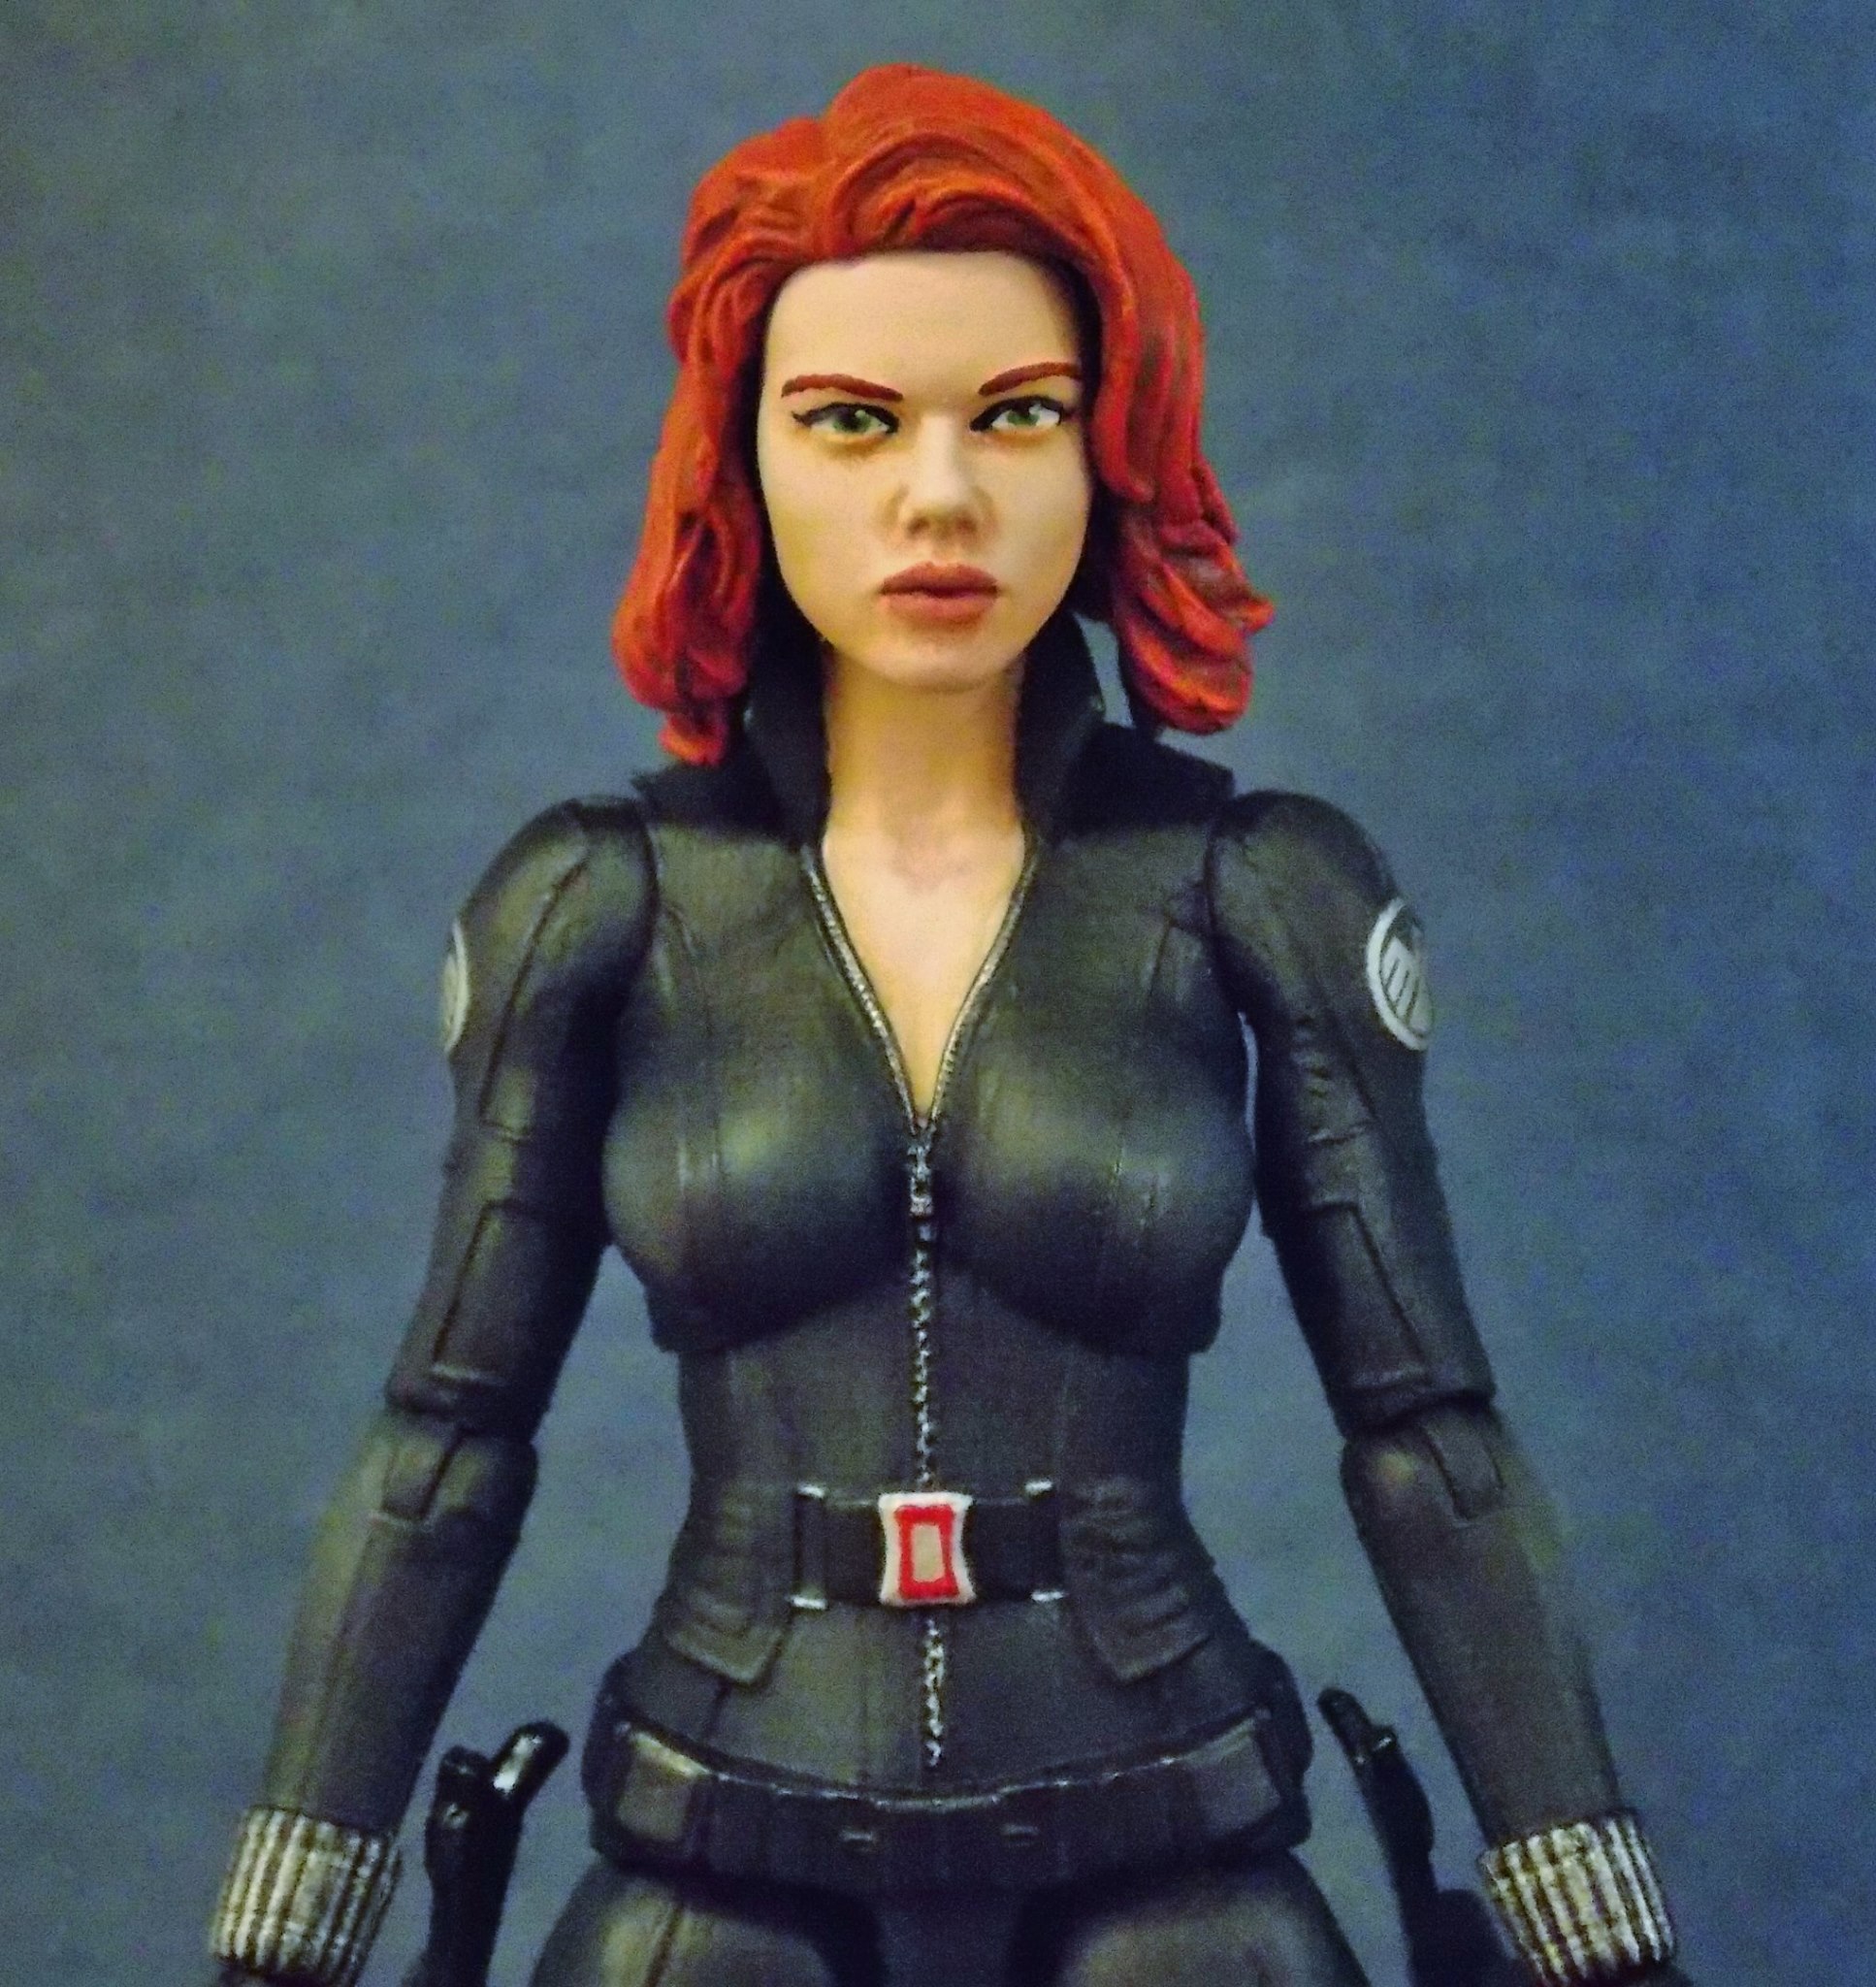 Black Widow Action Figure One Winged Customs